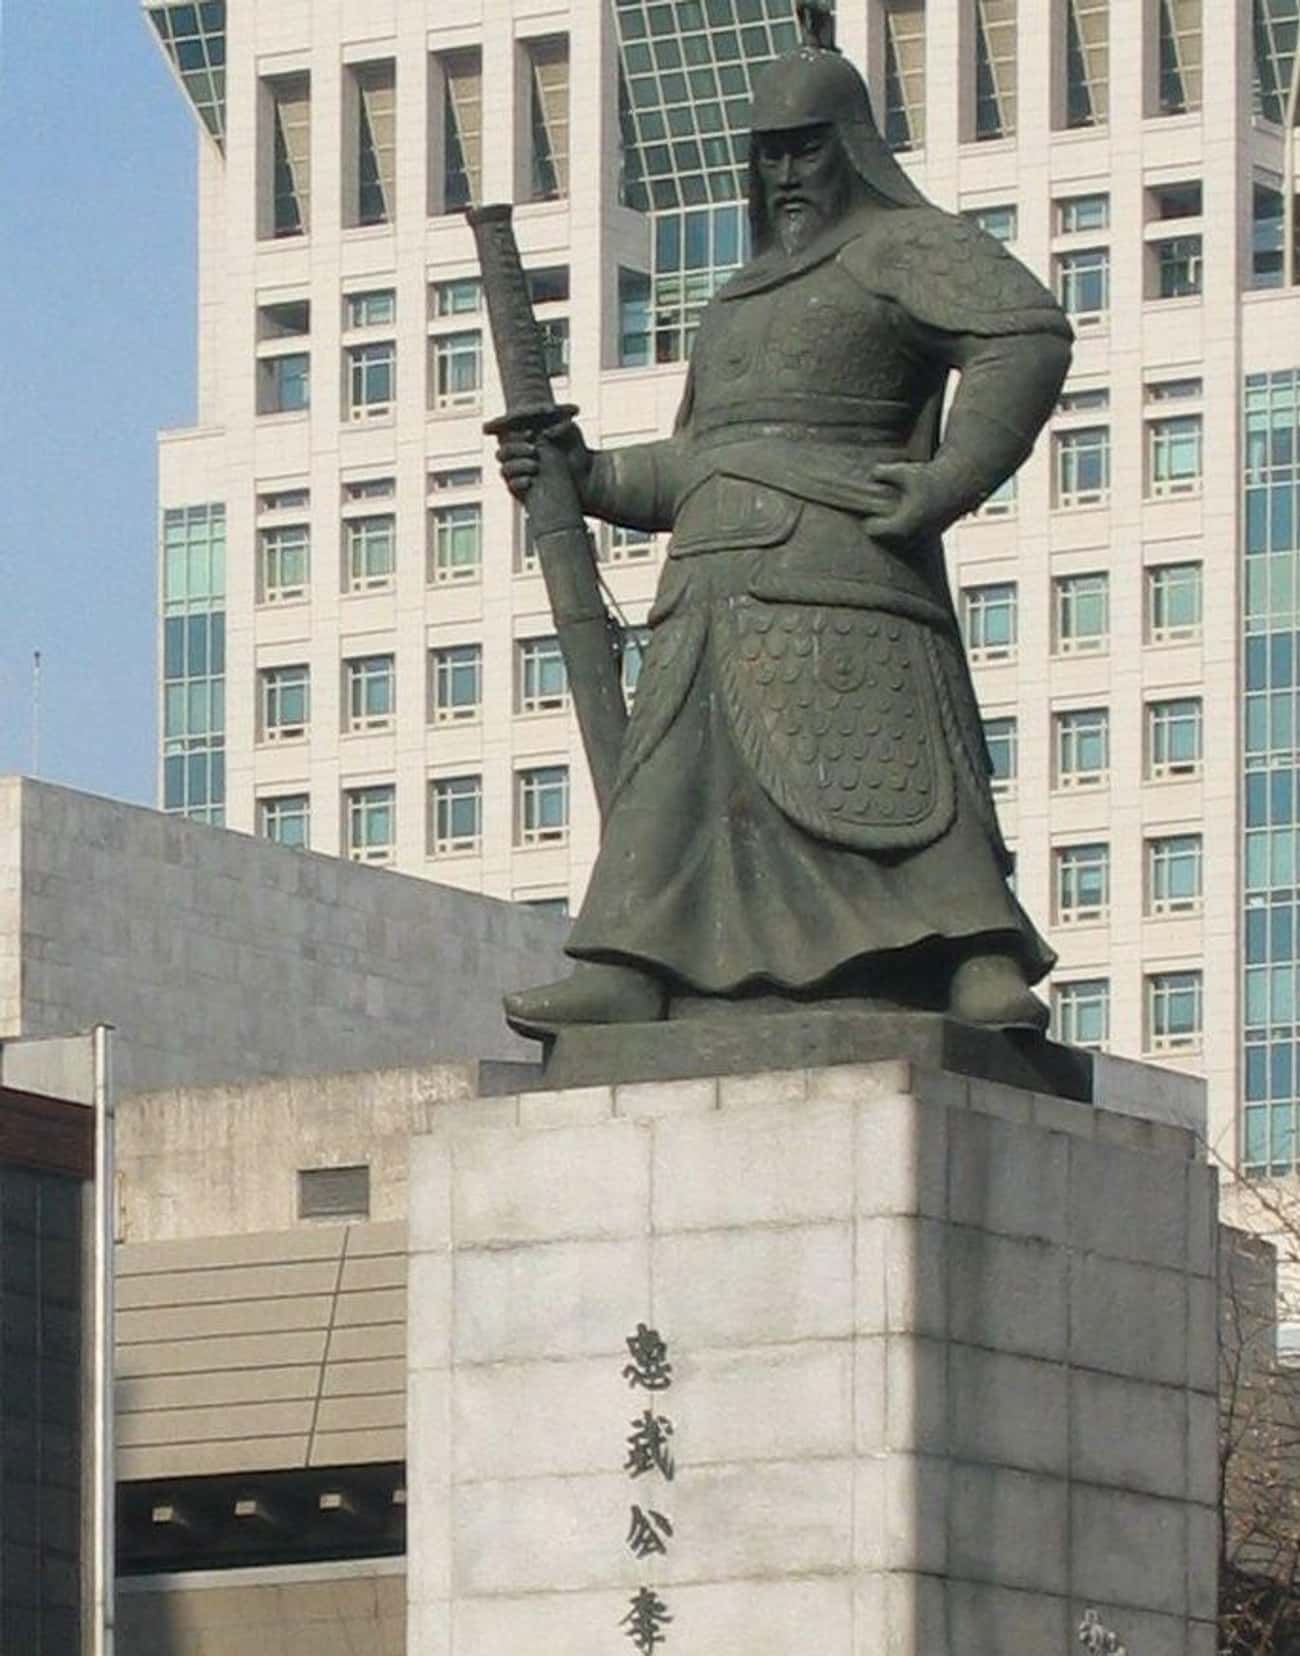 Korean Admiral Yi Sun-sin Used The Tides To Defeat An Enemy Fleet